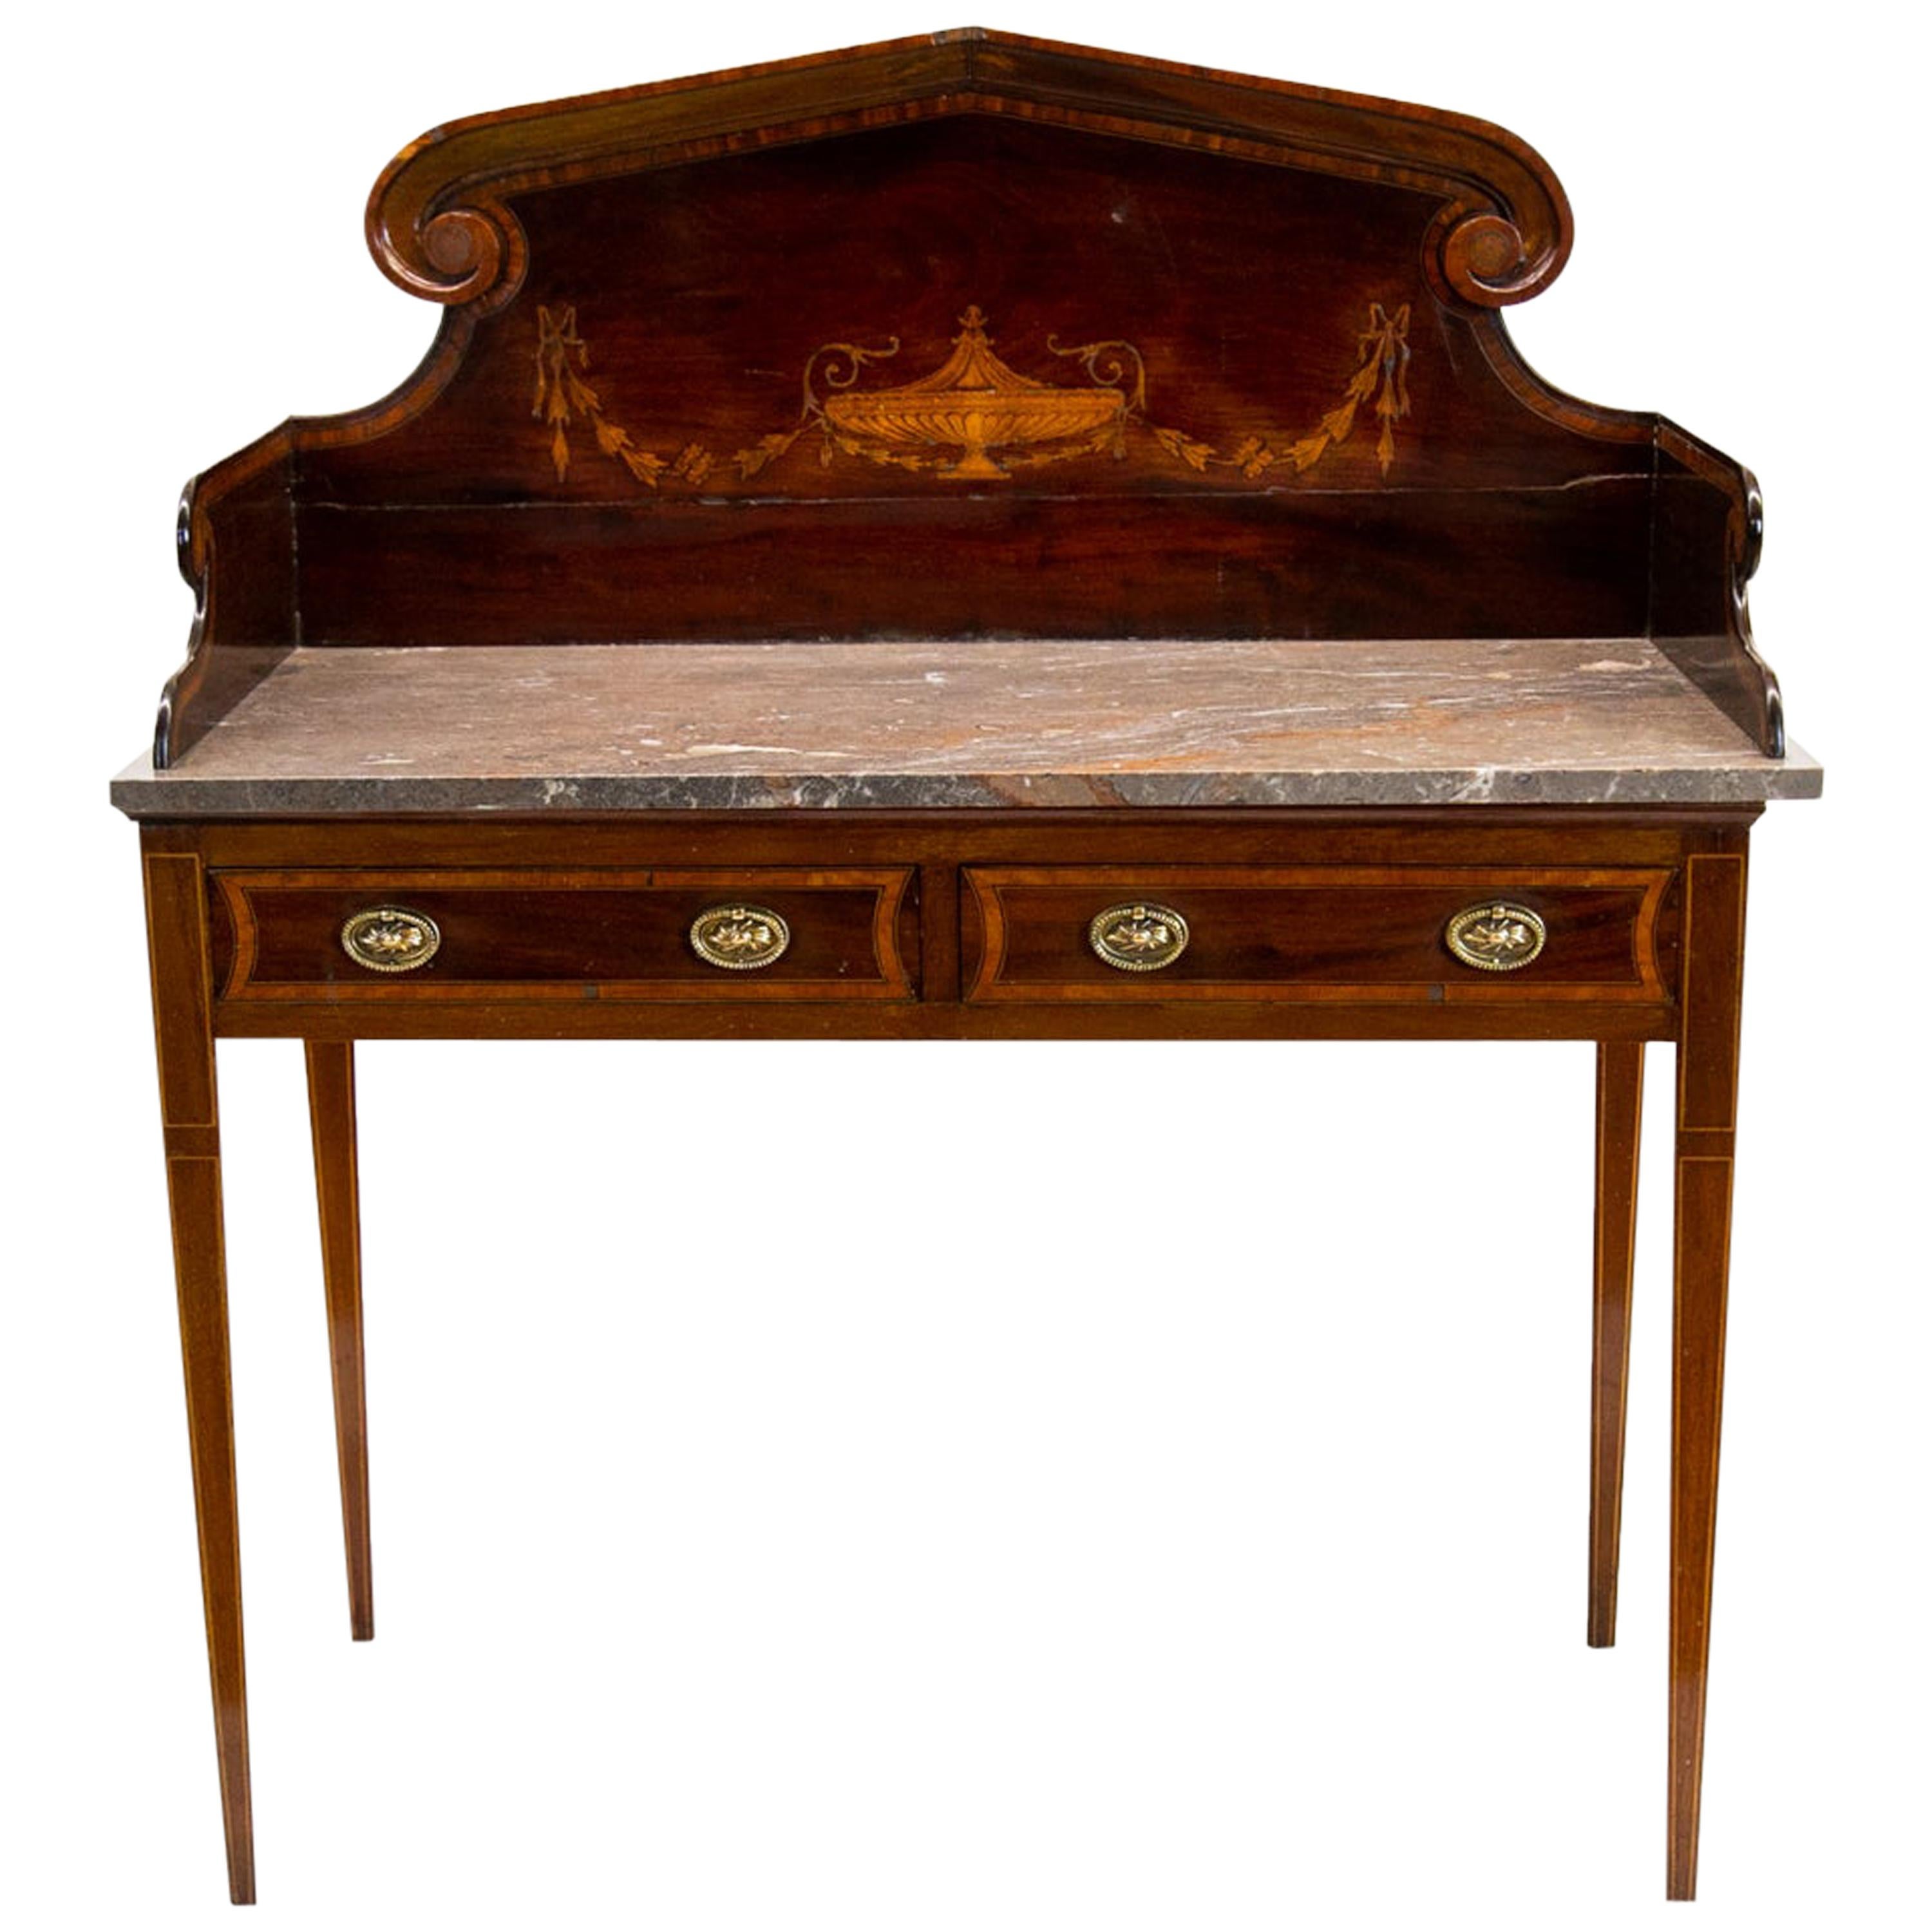 English Inlaid Marble-Top Serving Table For Sale